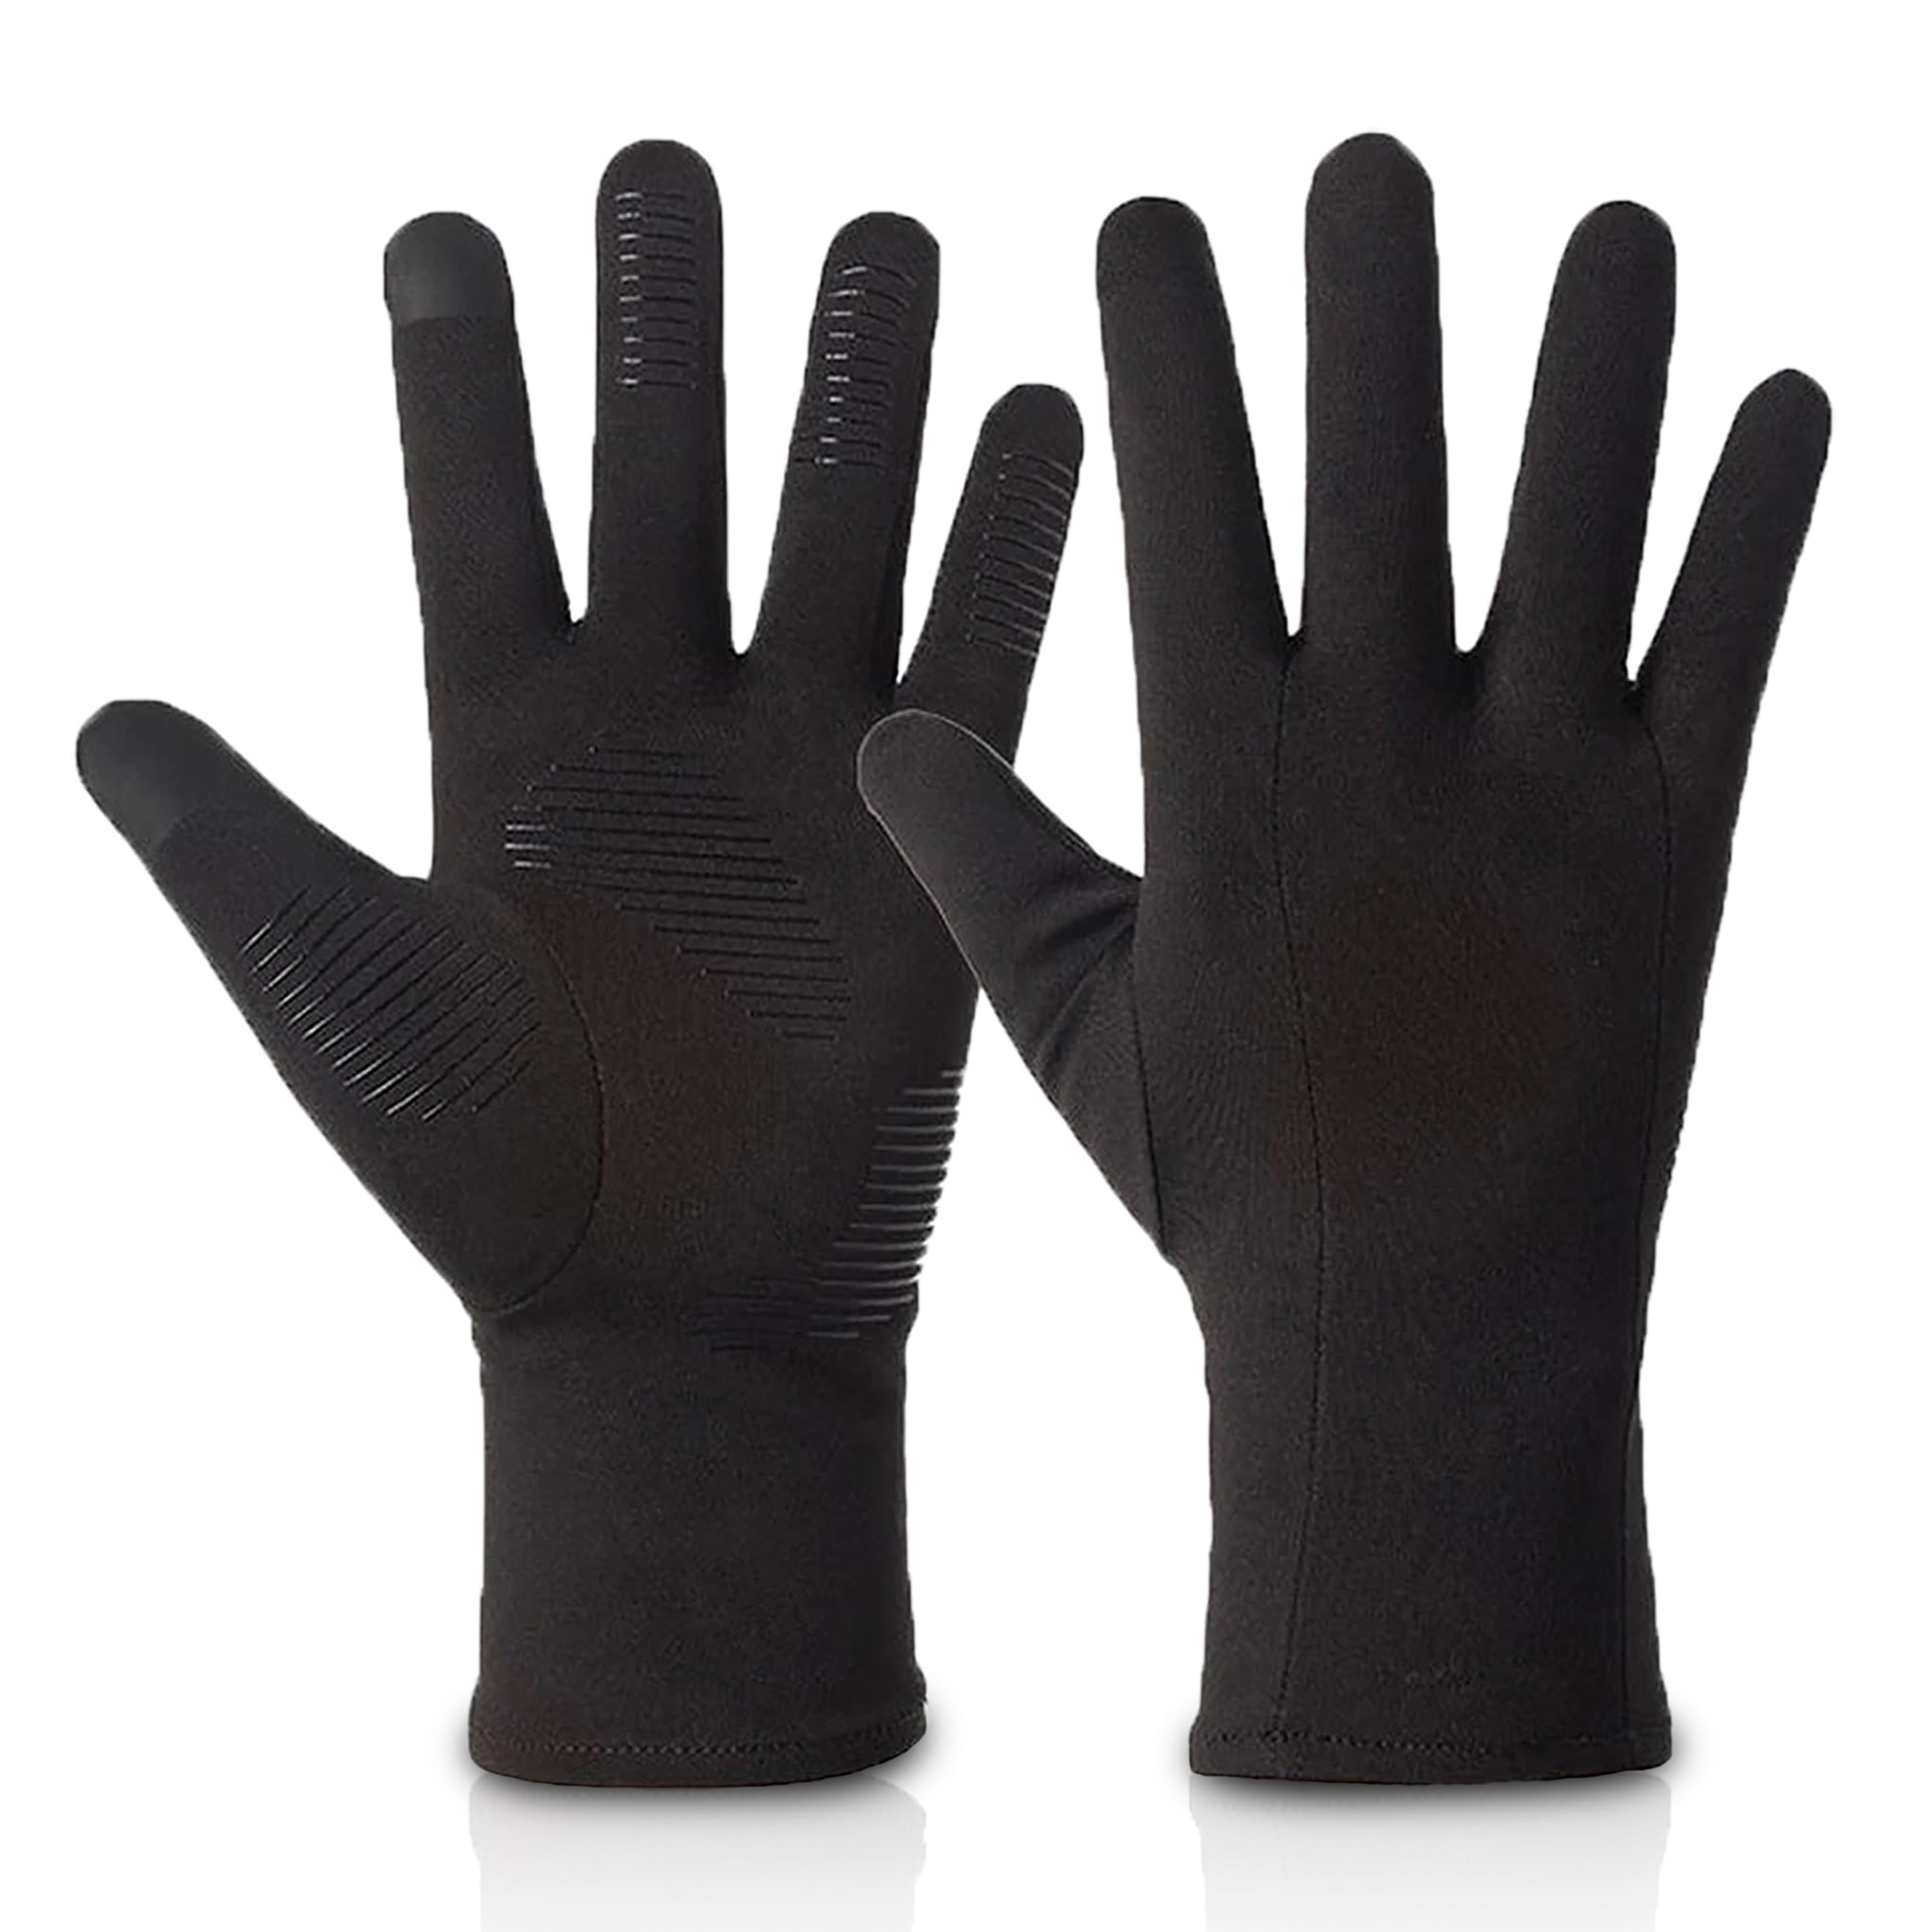 Vinson - Thermal Gloves | Ski Cycling Gloves | Touchscreen Gloves